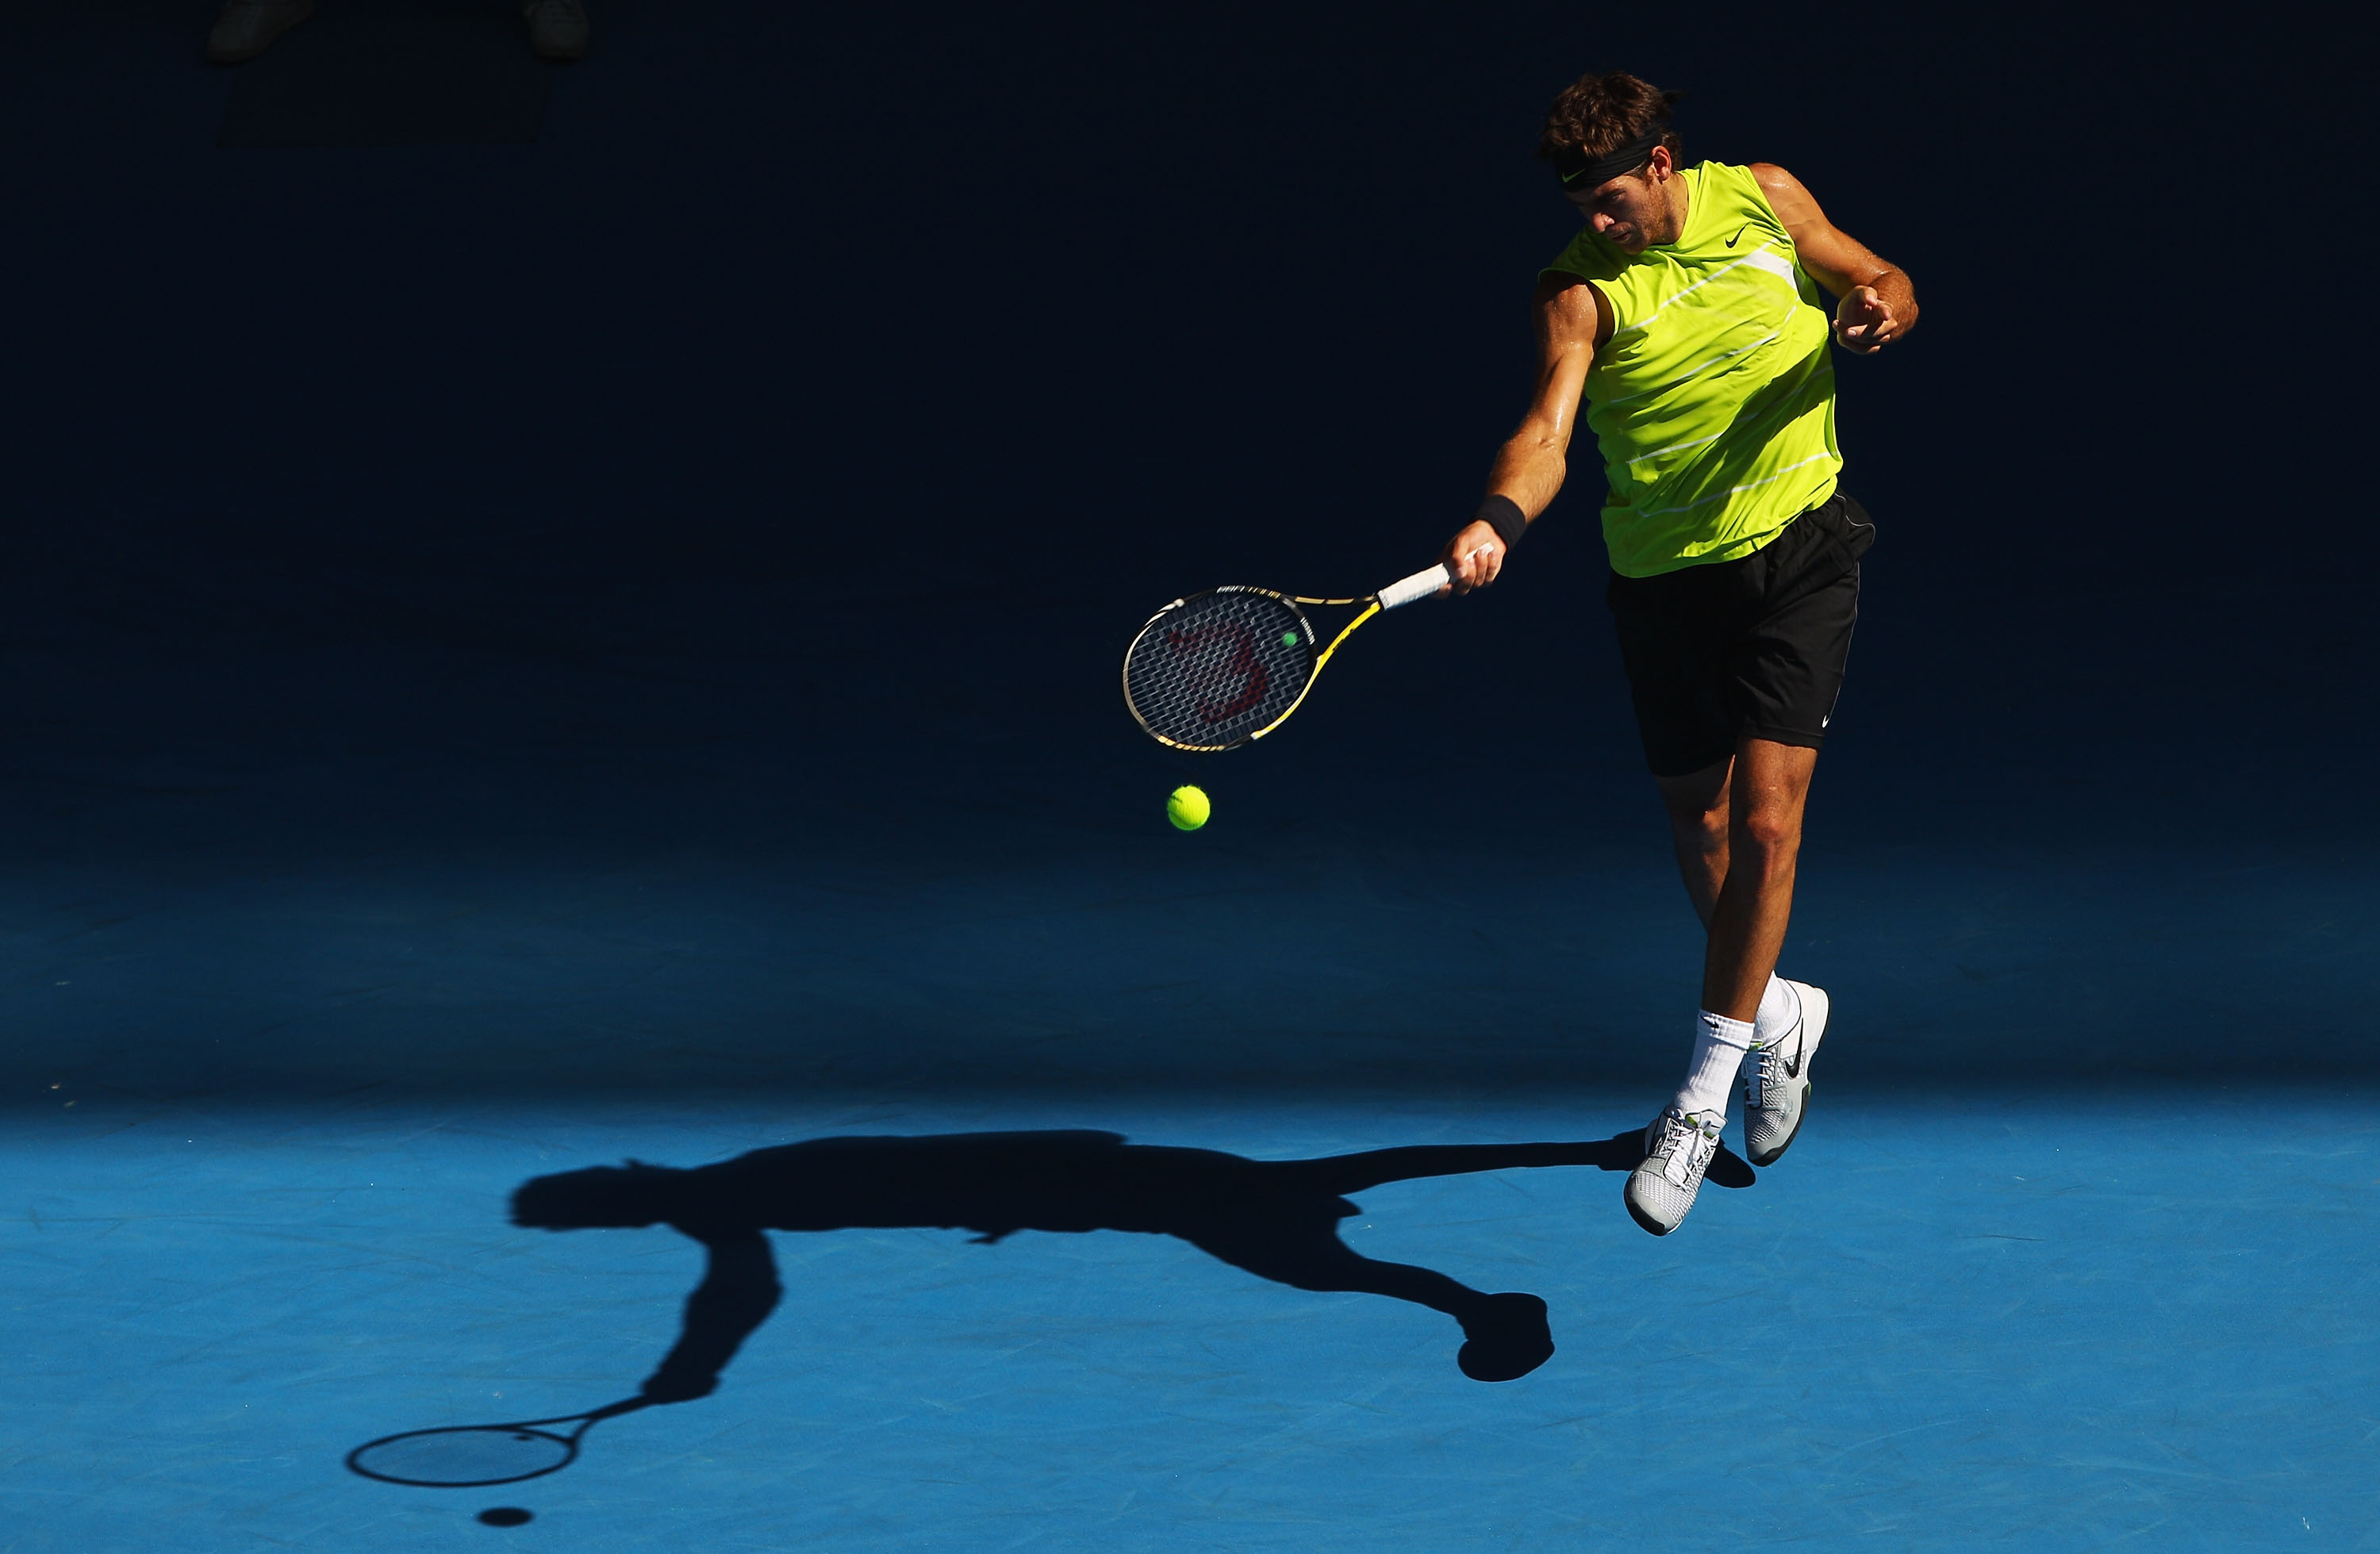 MELBOURNE, AUSTRALIA - JANUARY 24:  Juan Martin Del Potro of Argentina plays a forehand in his fourth round match against Marin Cilic of Croatia during day seven of the 2010 Australian Open at Melbourne Park on January 24, 2010 in Melbourne, Australia.  (